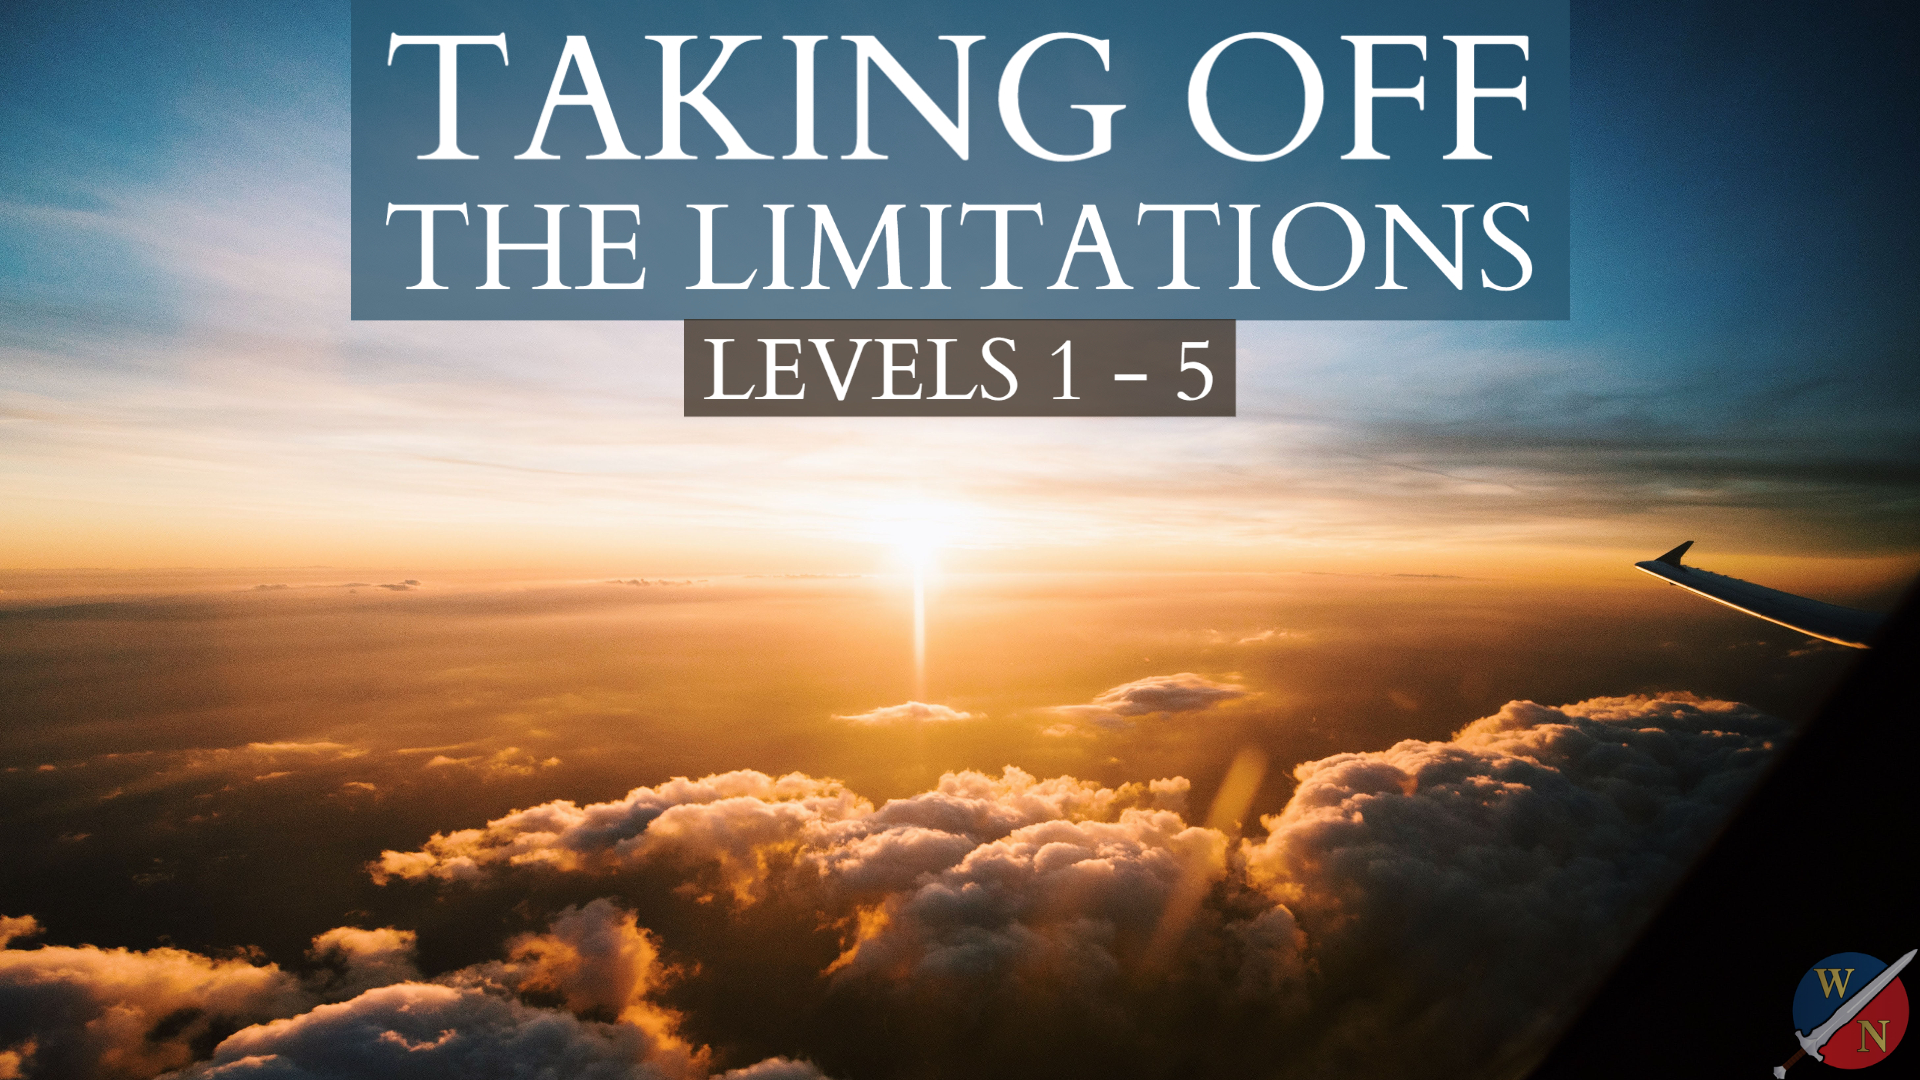 Taking Off The Limitations bundle by Dr. Kevin Zadai